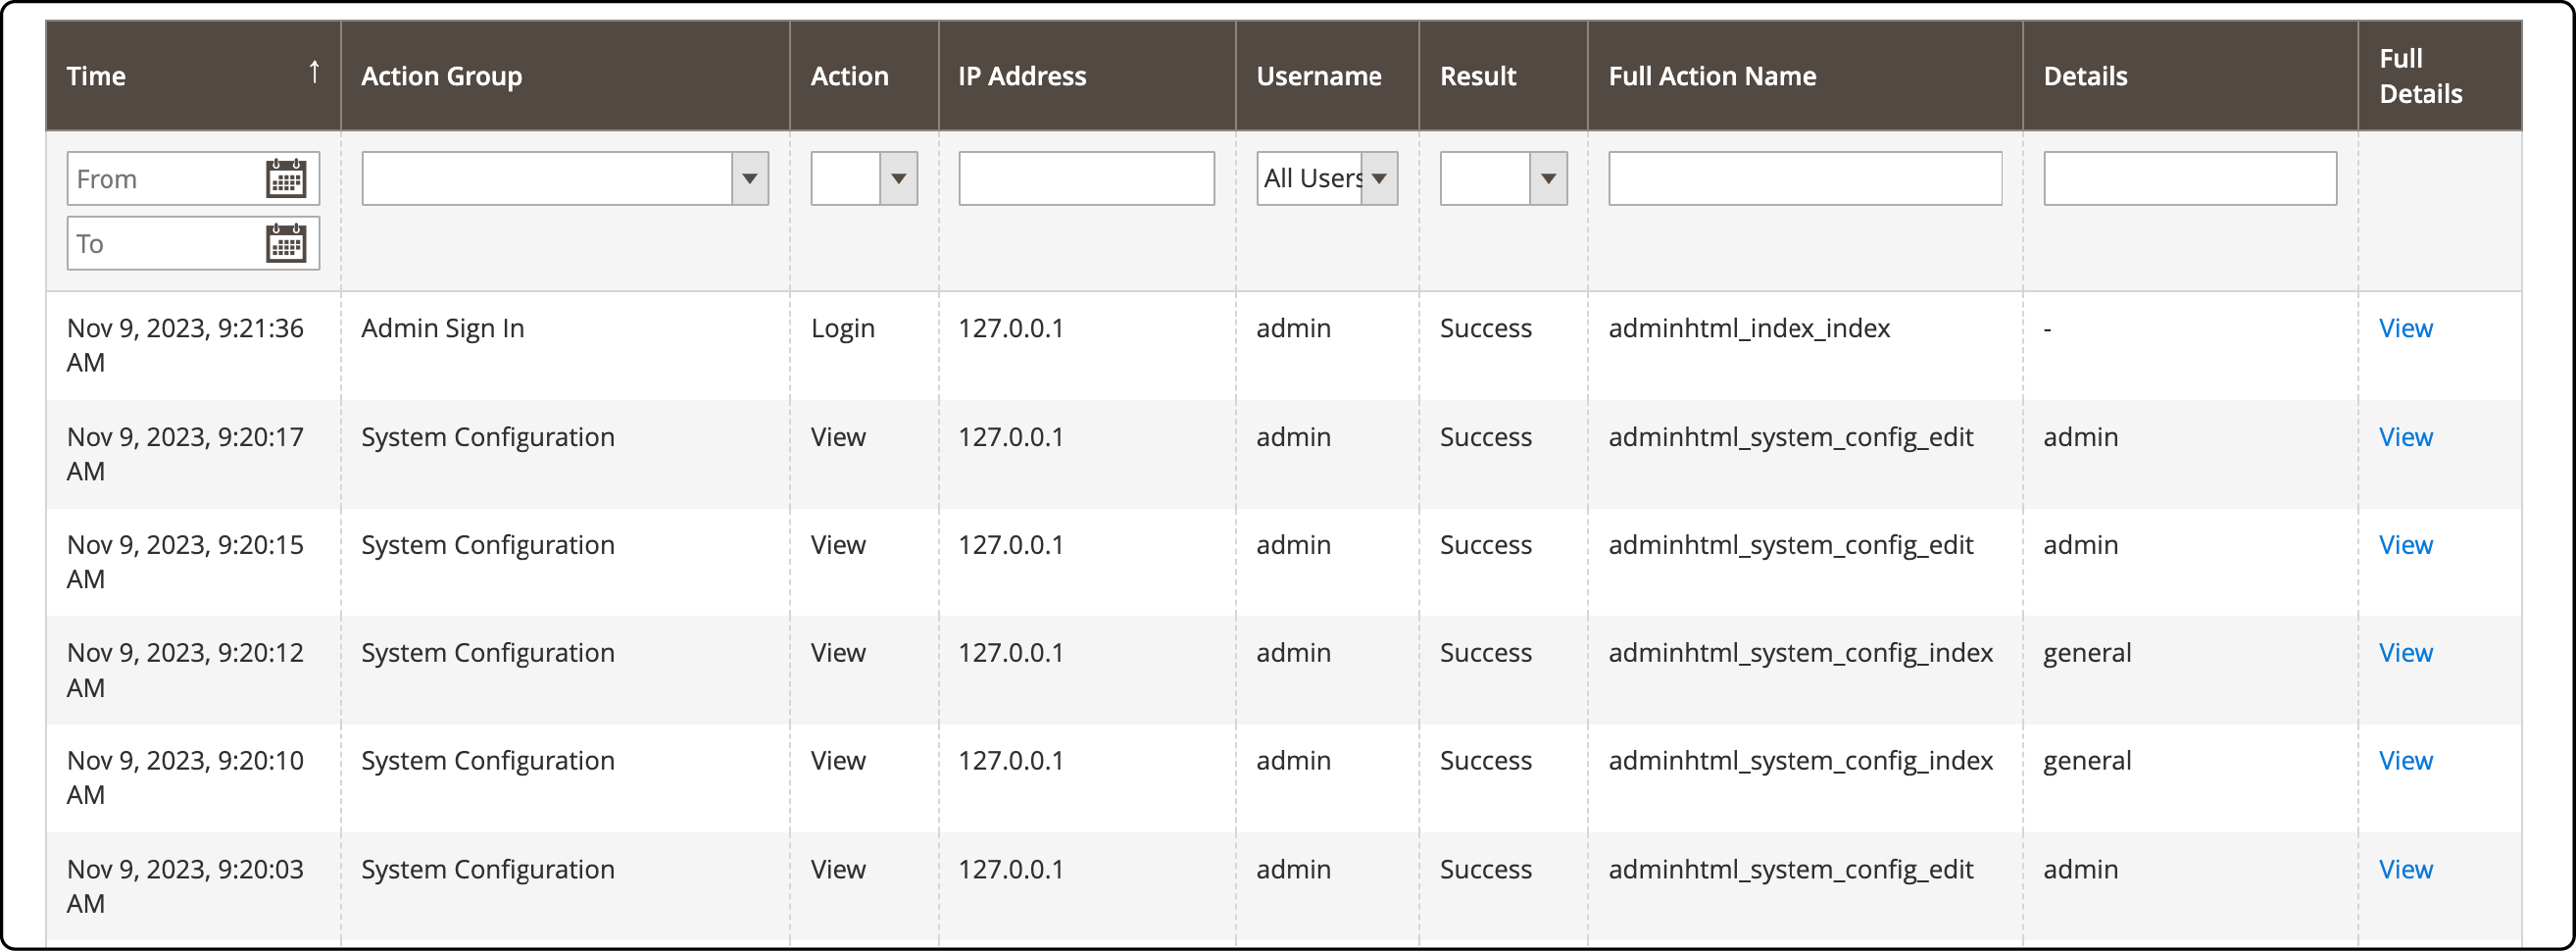 Detailed instructions on accessing Admin Action Log reports in Magento 2